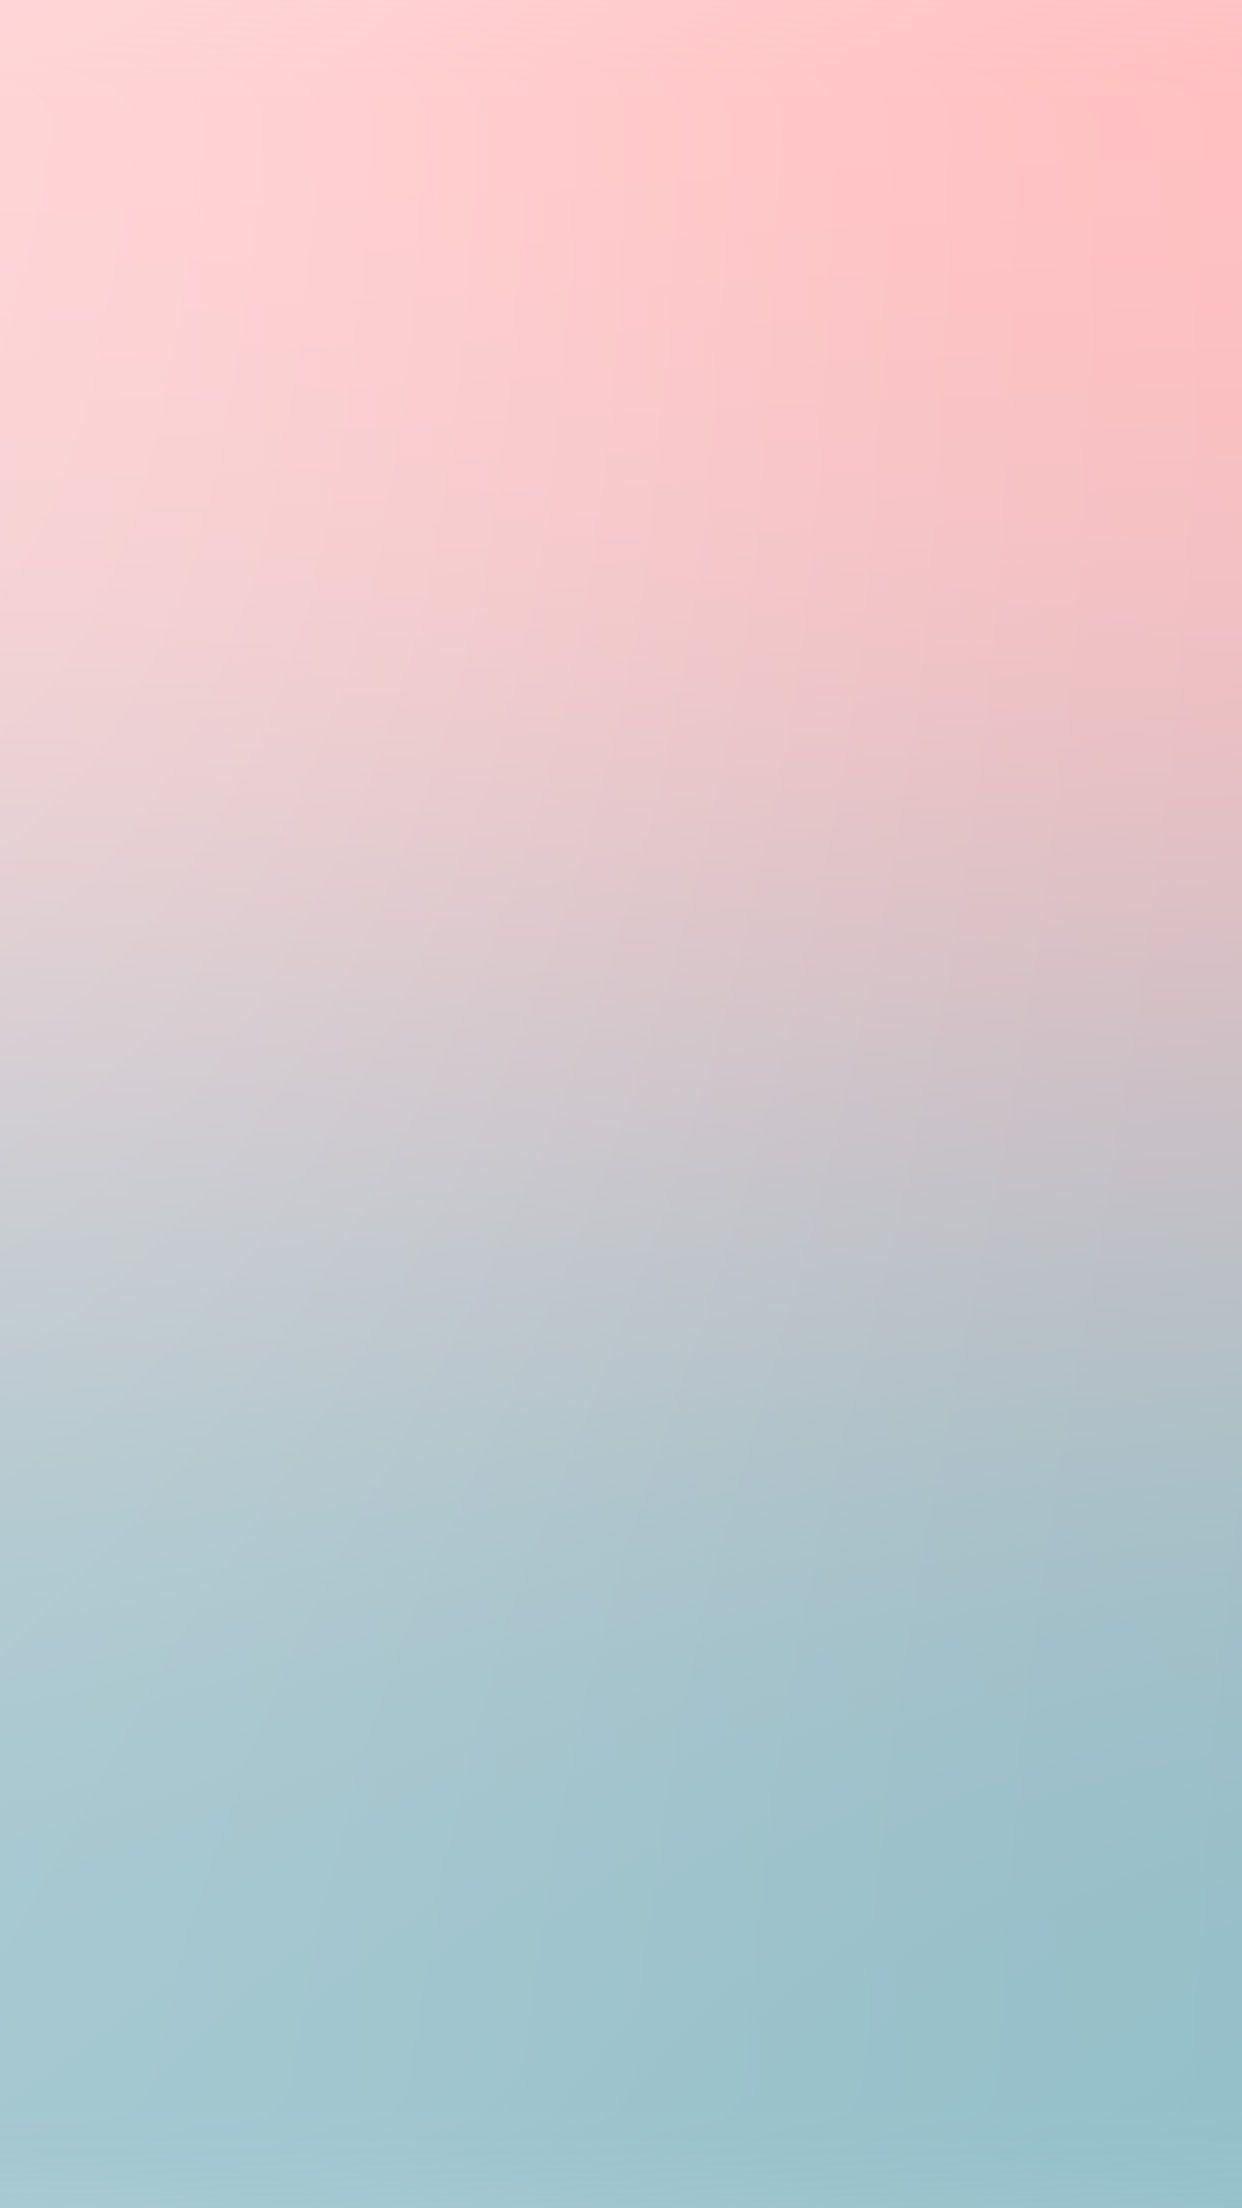 Pastel Colors Aesthetic Blue And Pink Wallpapers - Wallpaper Cave